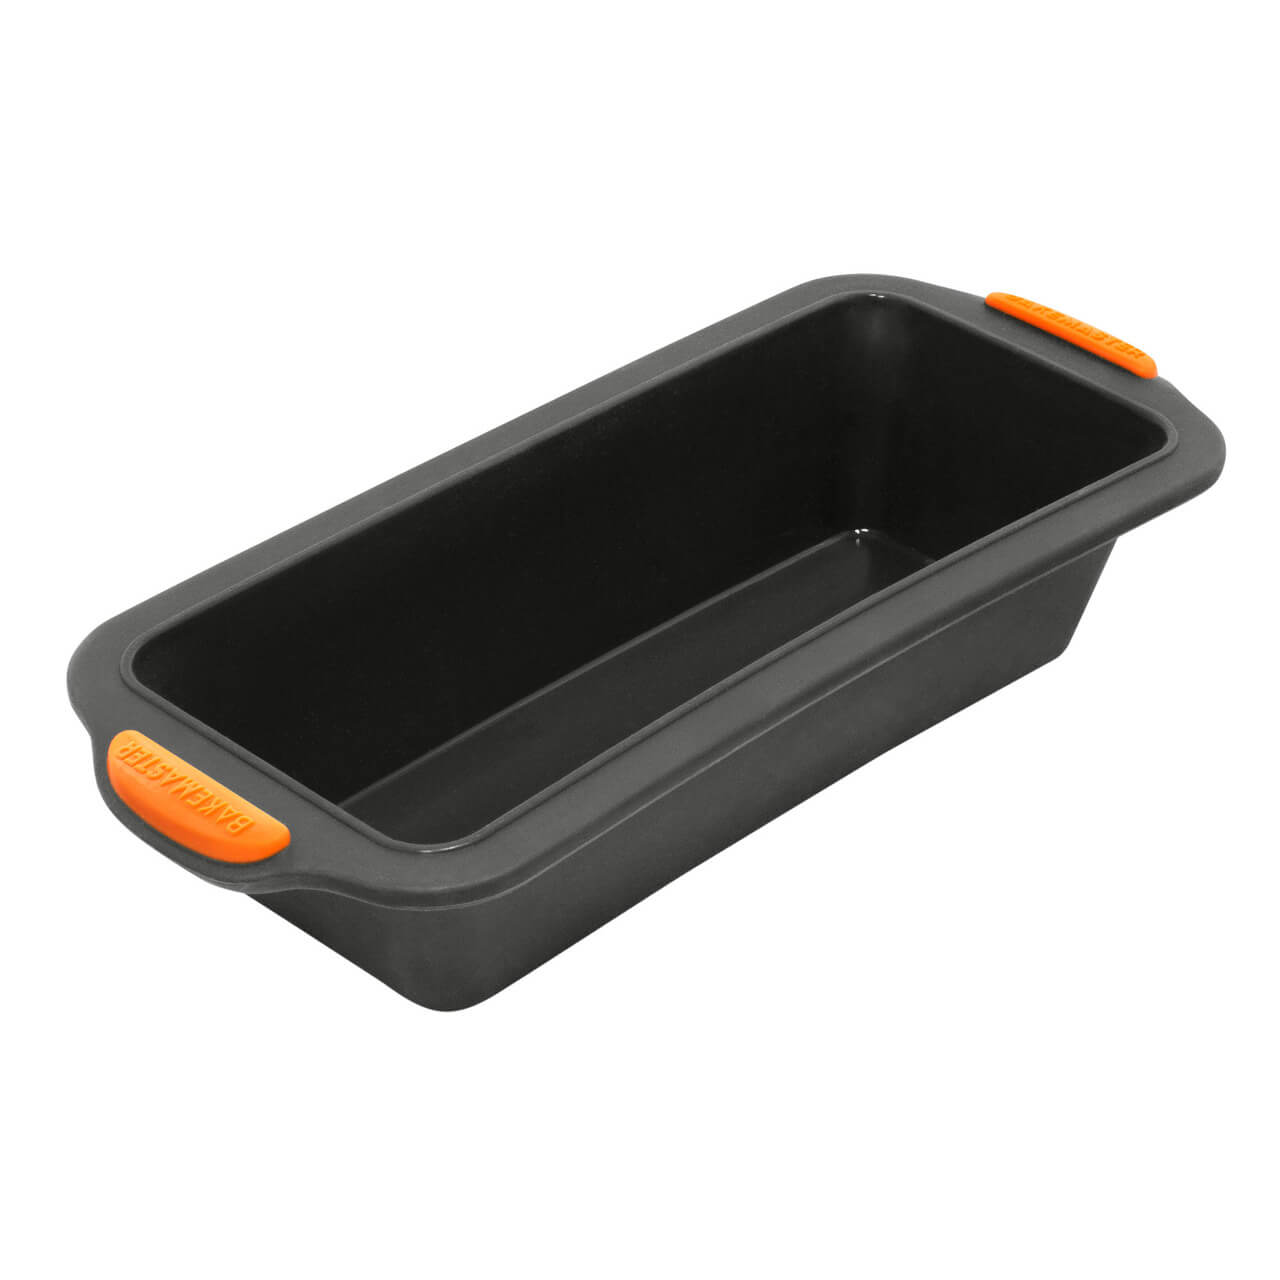 Bakemaster Silicone Loaf Pan 24x10cm